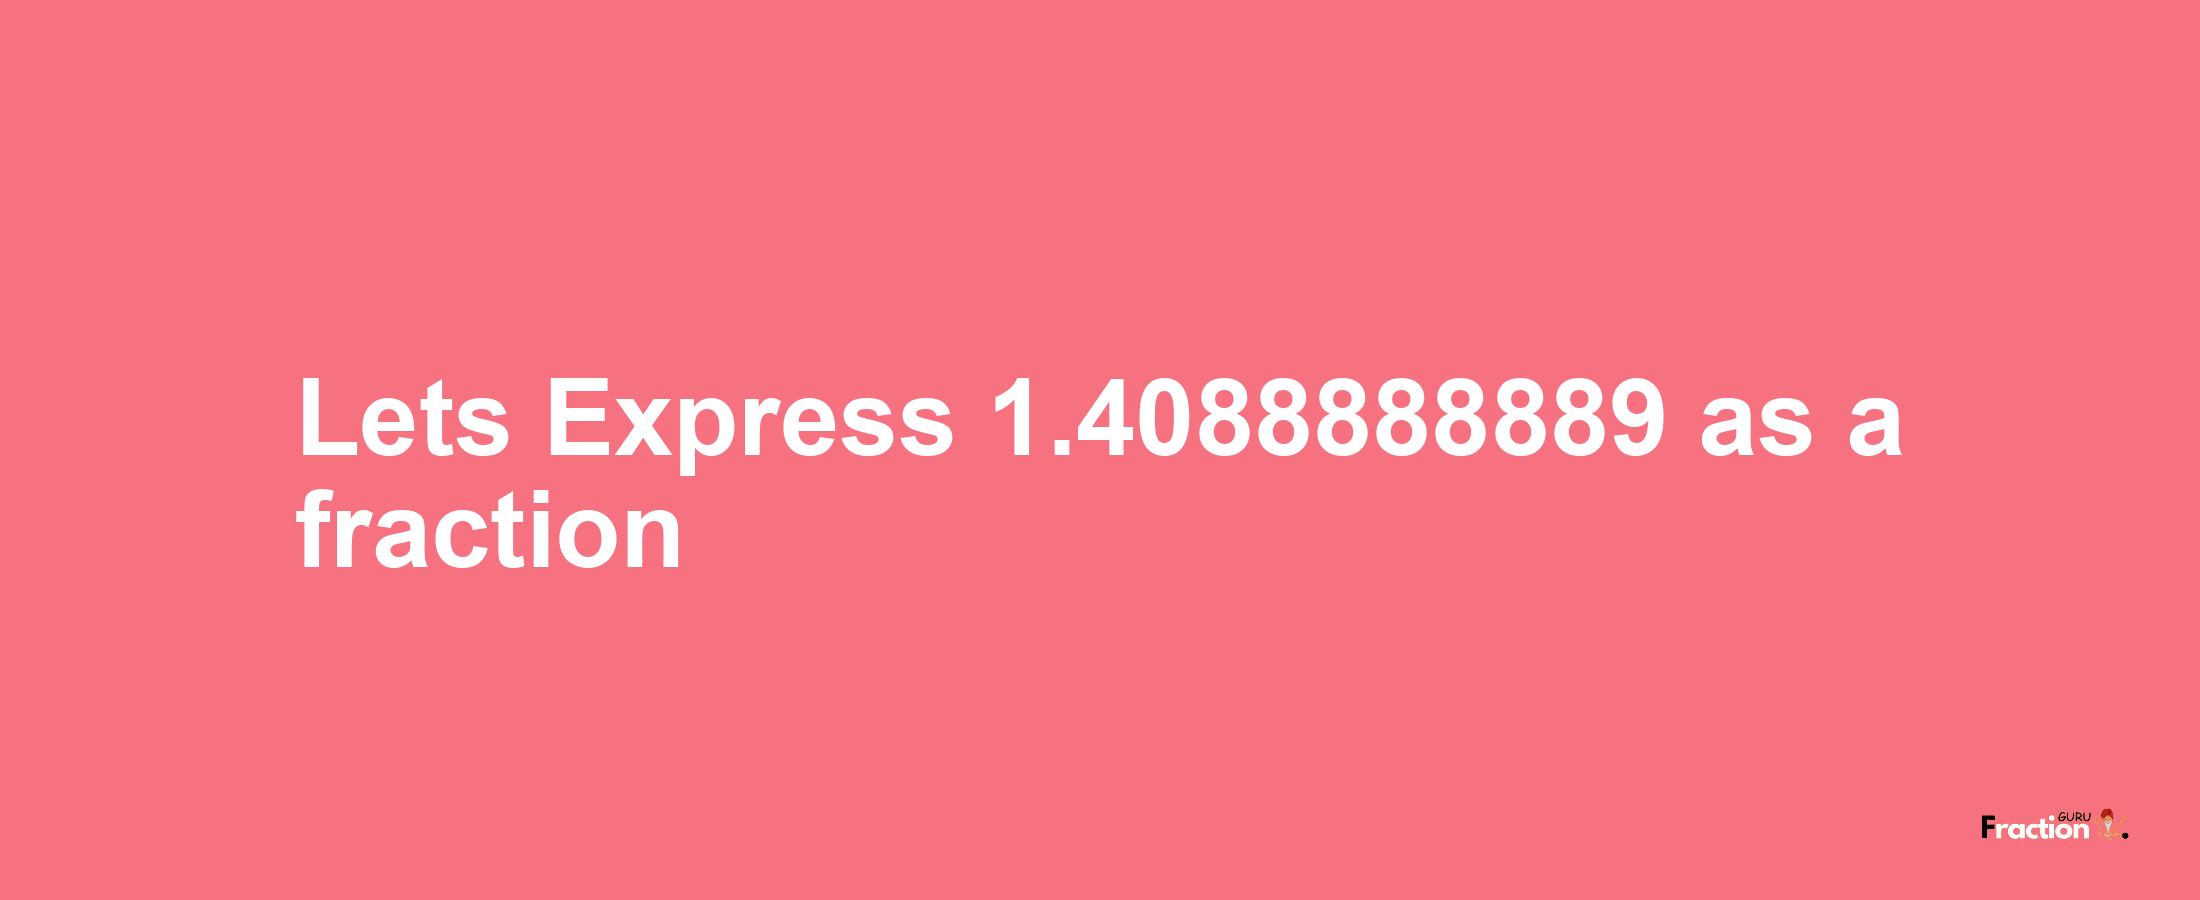 Lets Express 1.4088888889 as afraction